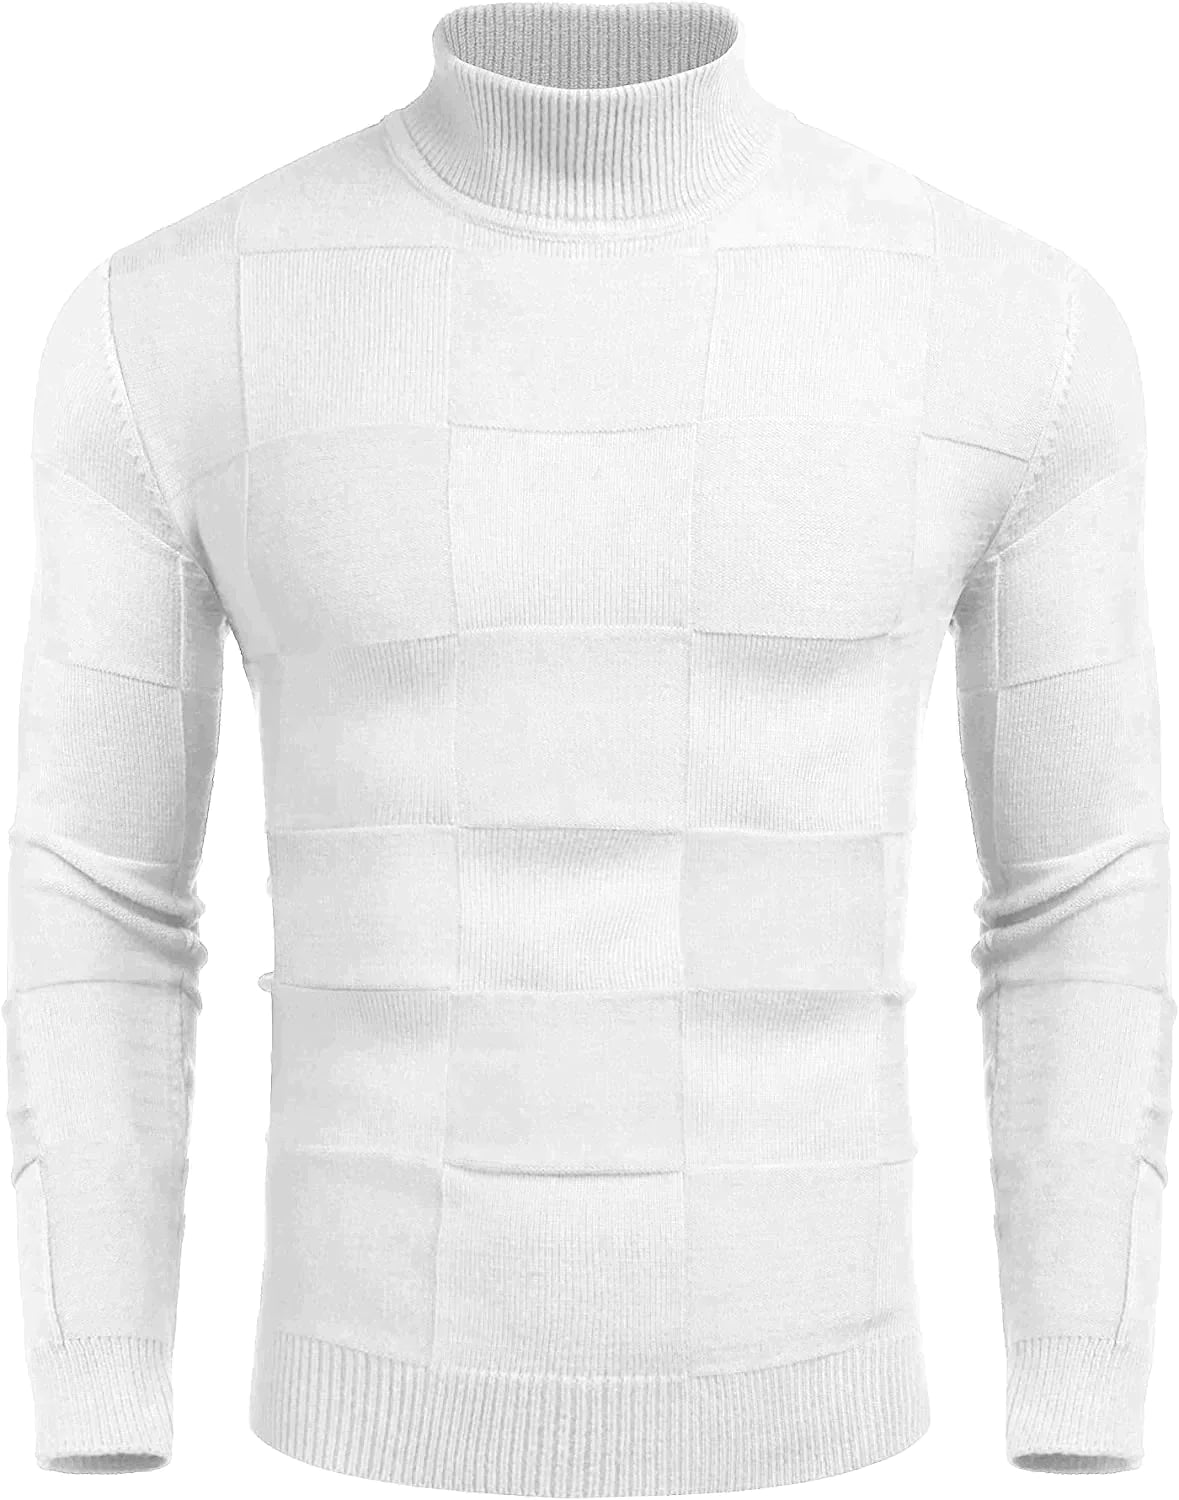 Ribbed Knit Pullover Sweater Turtneck Sweaters (US Only) Sweaters COOFANDY Store White M 